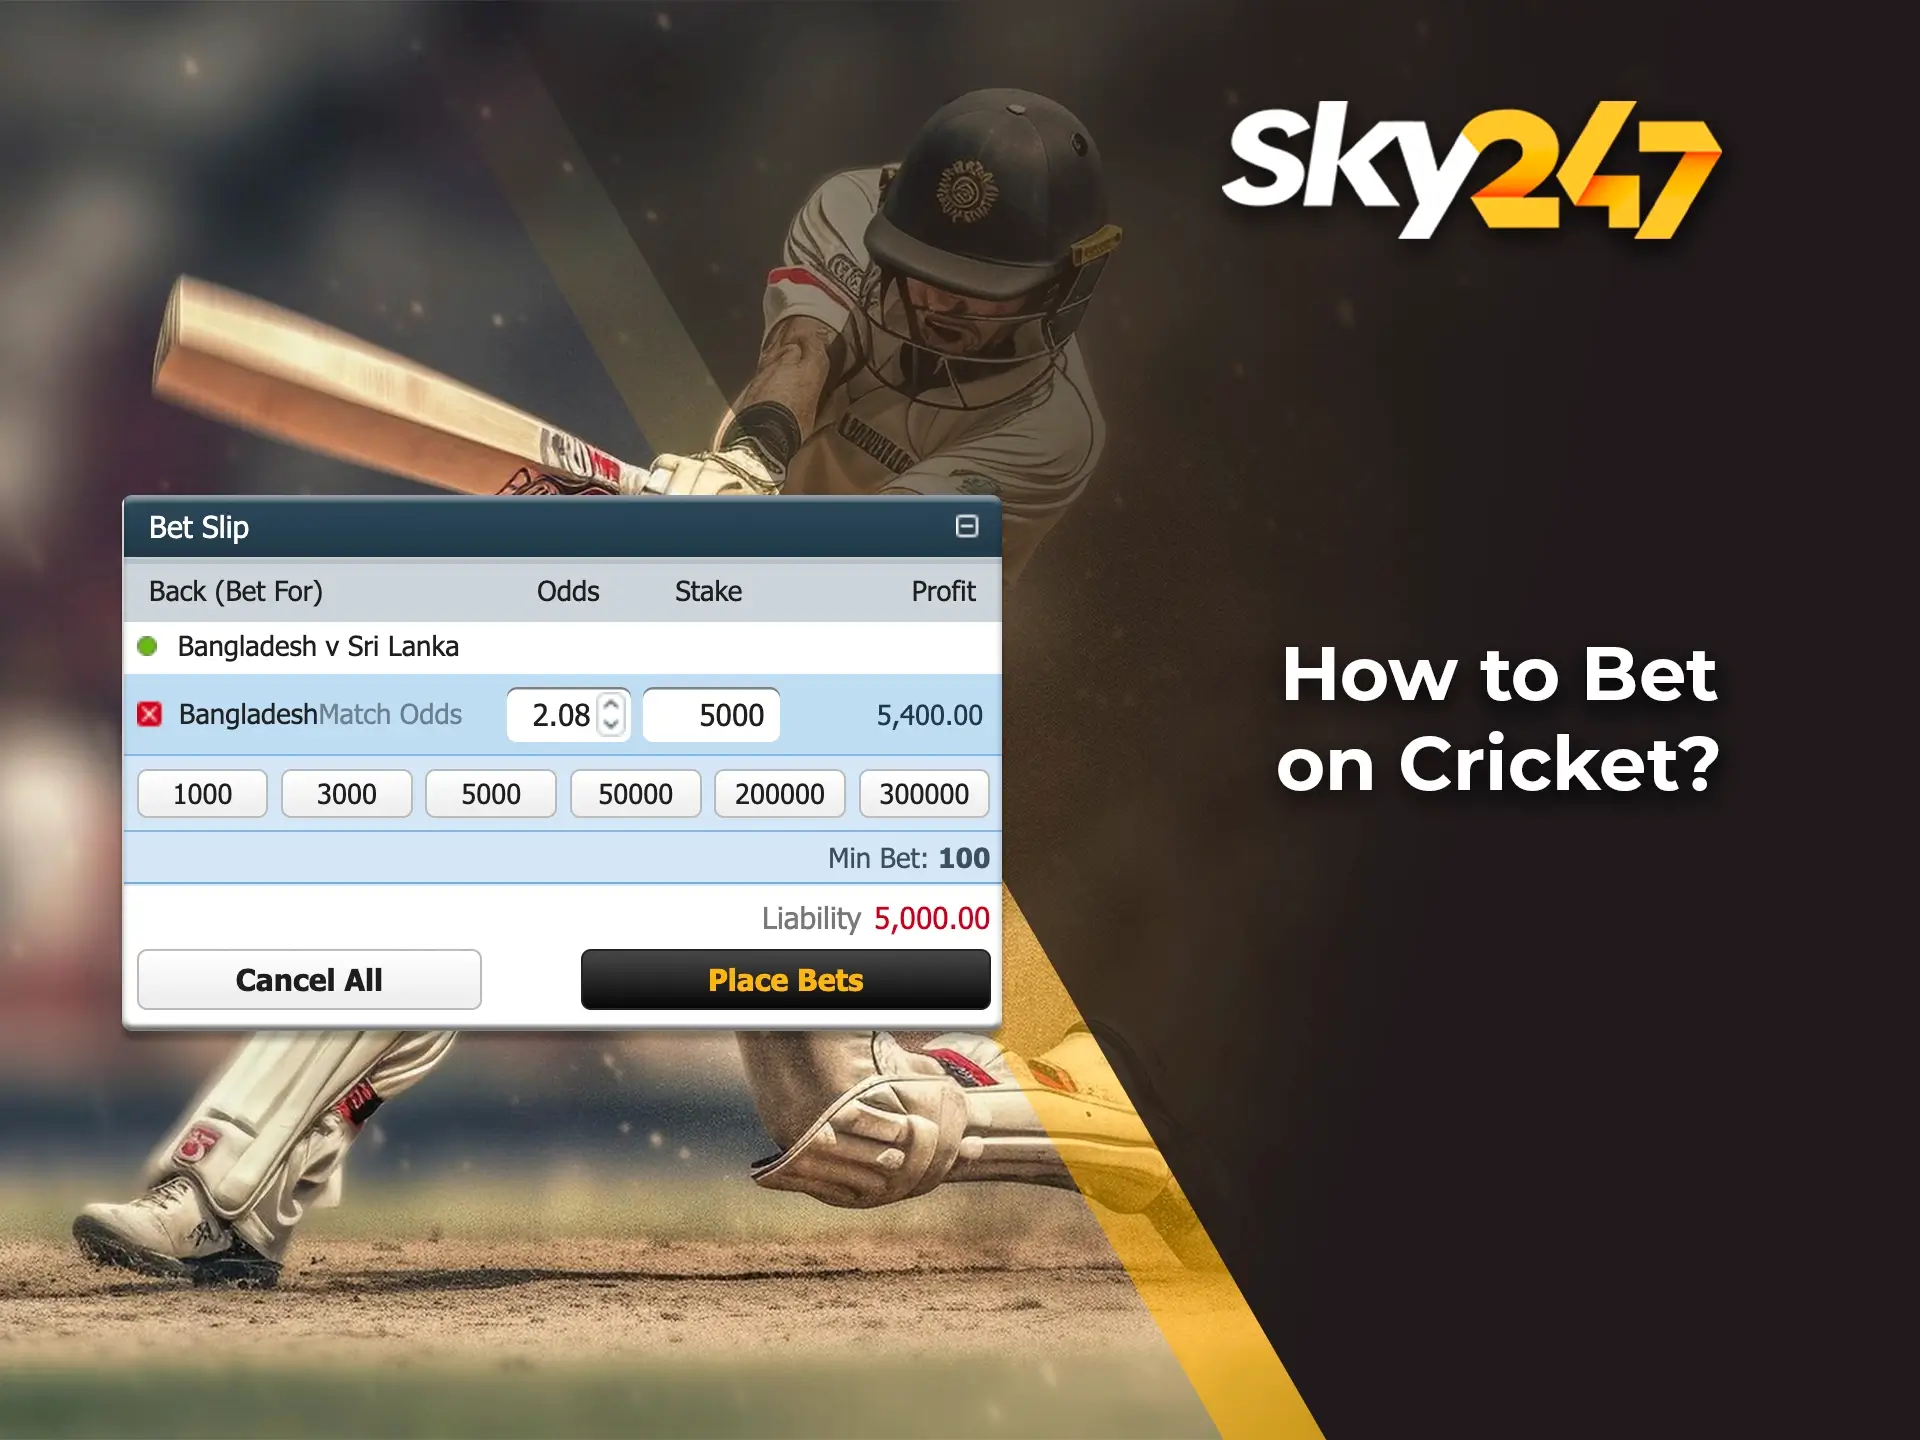 Register your account to get full access to cricket betting at Sky247.